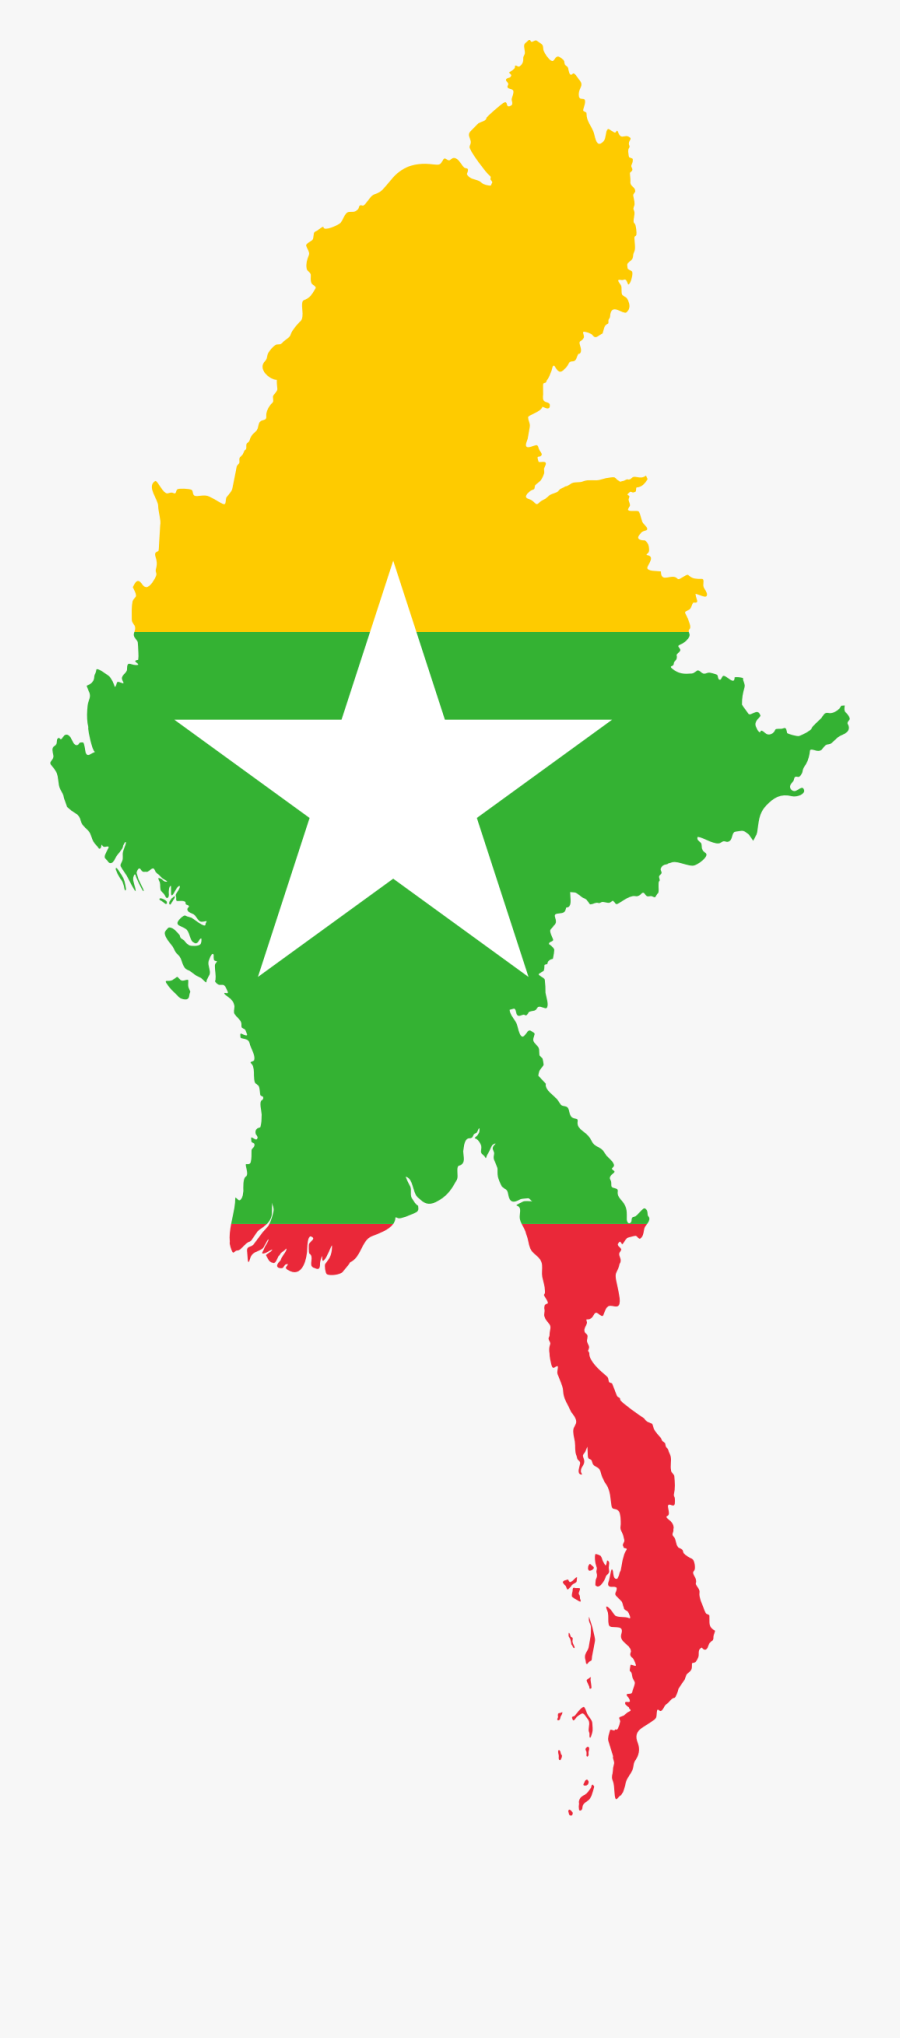 Clipart - Myanmar Map And Flag, Transparent Clipart